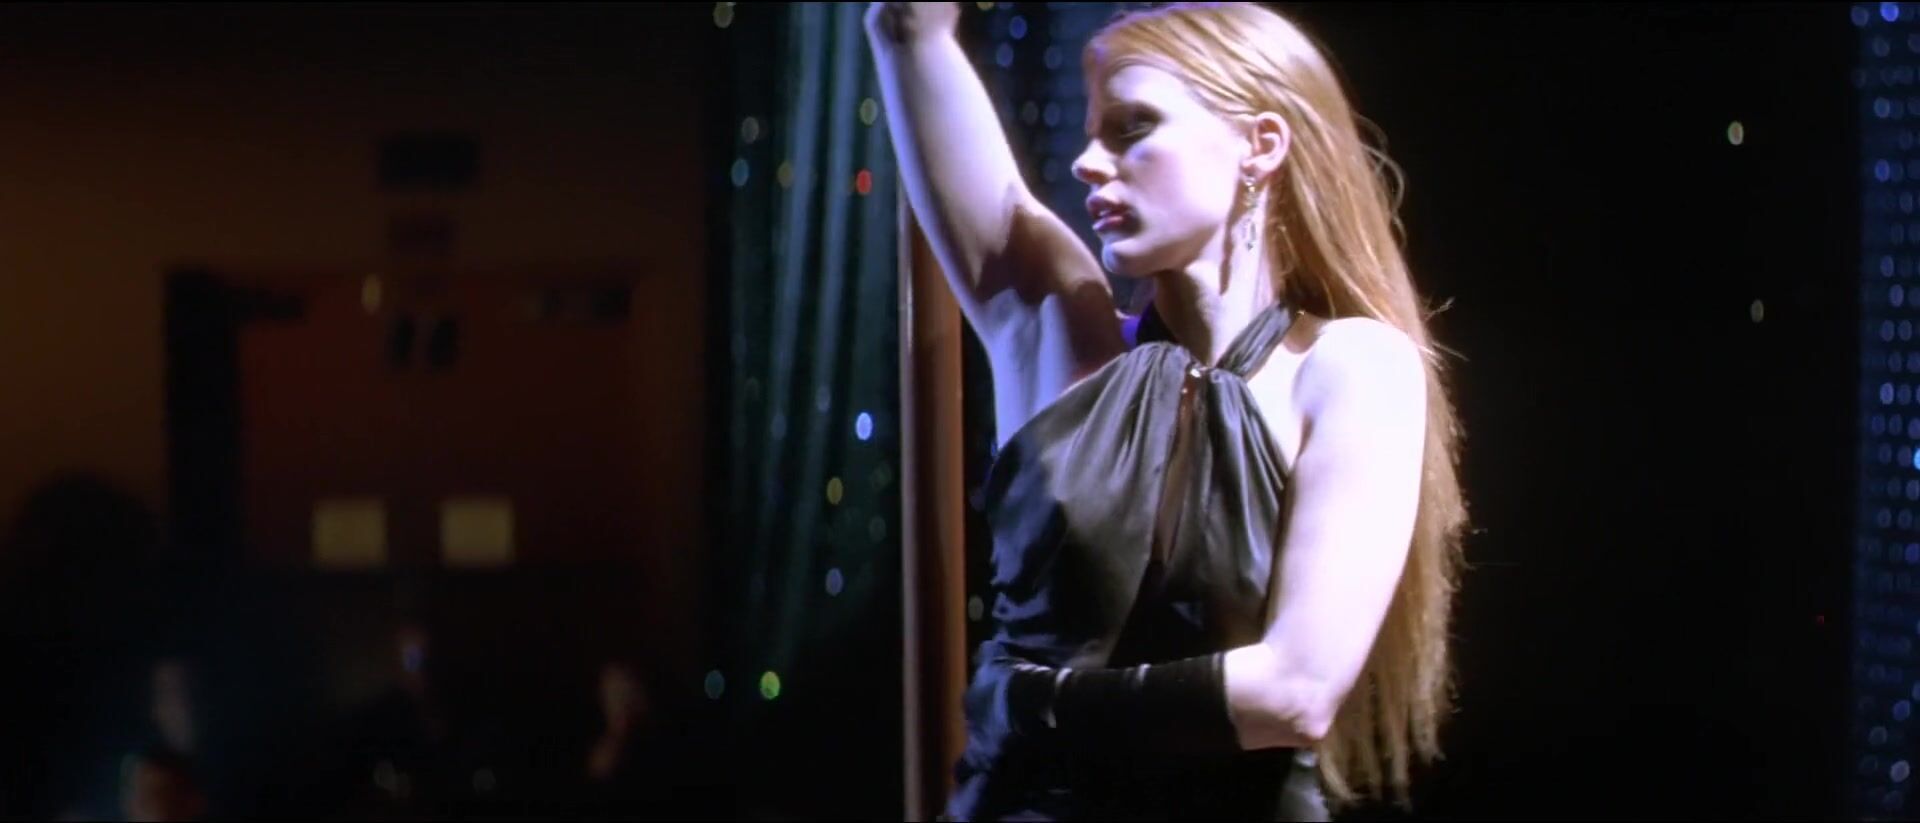 Curious Jessica Chastain moves around pole and pulls dress down showing boobies in Jolene (2008) Raw - 1